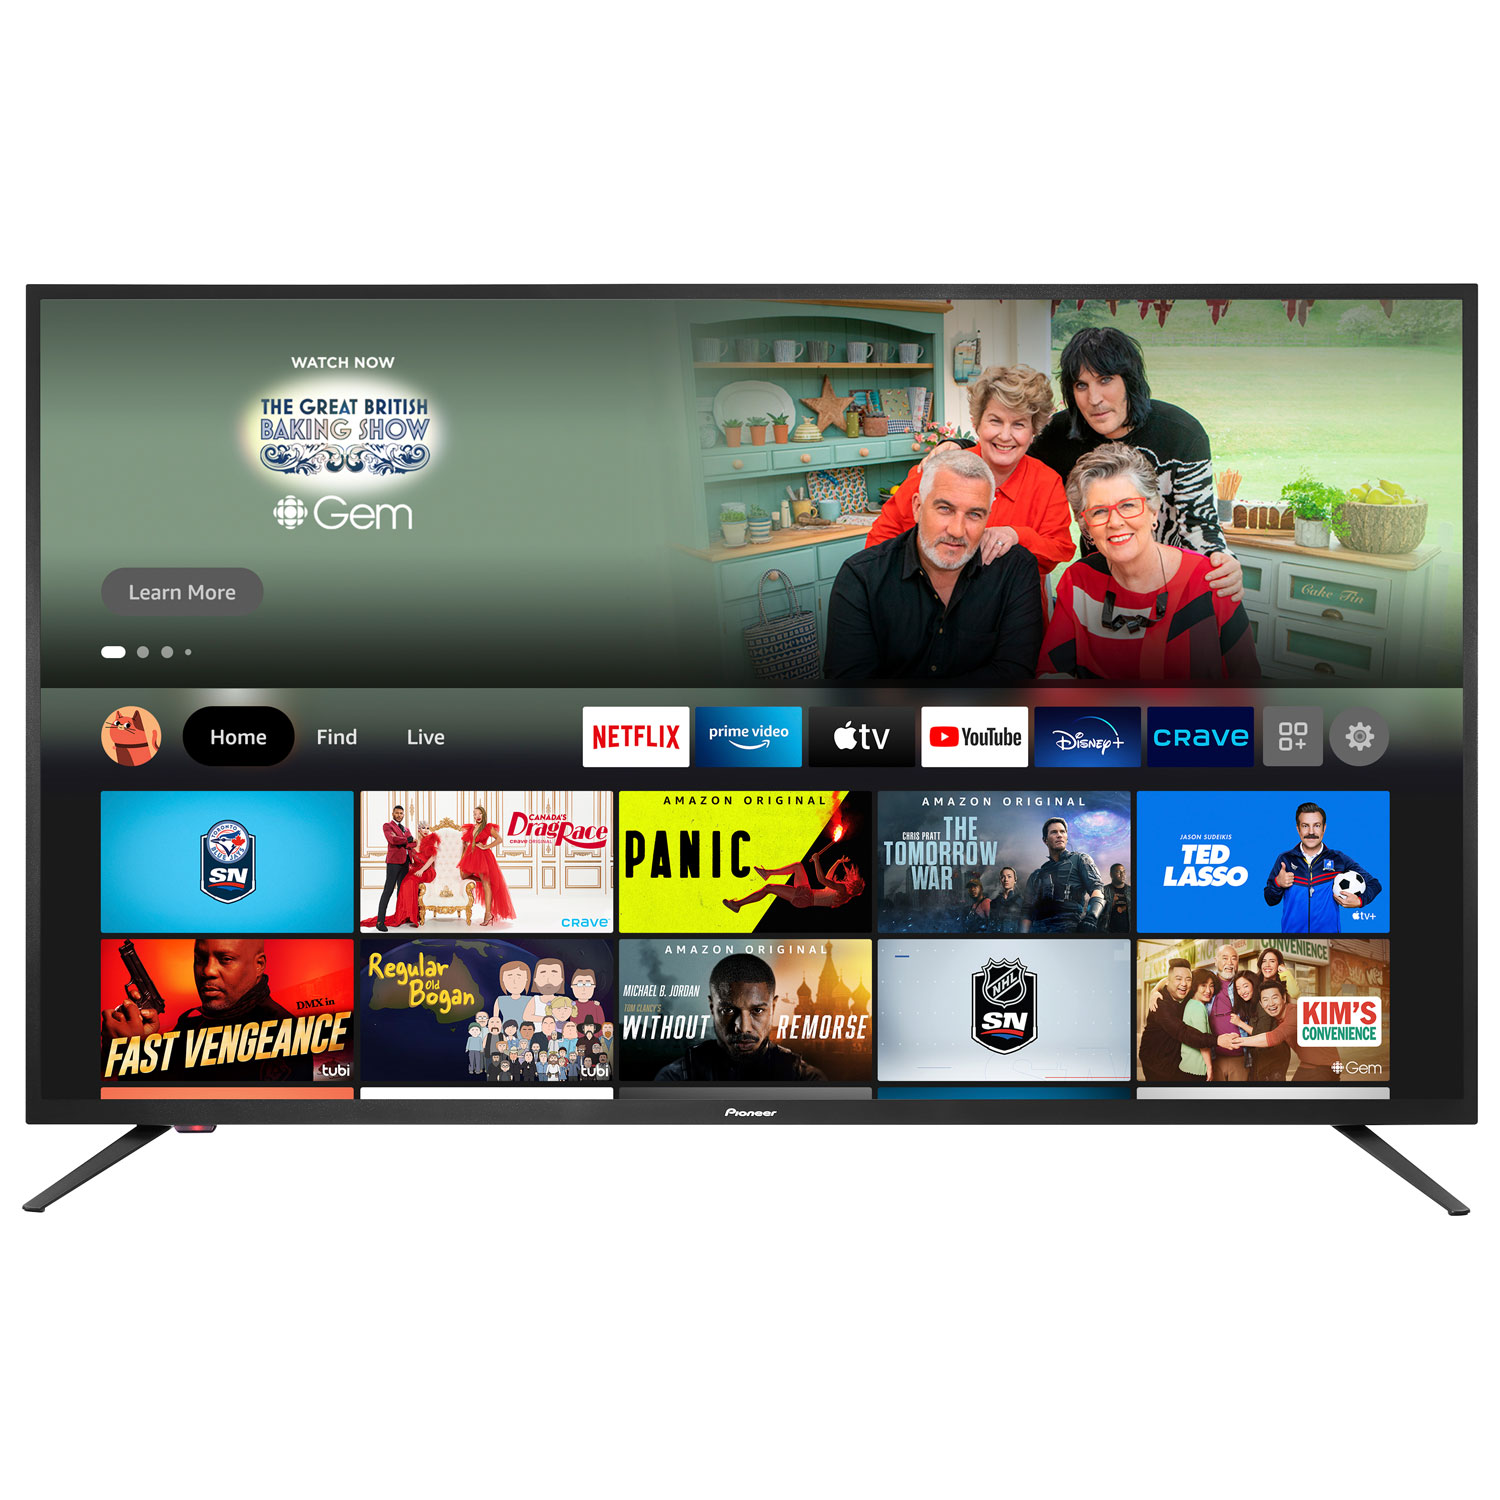 Pioneer 50" 4K UHD HDR LED Smart TV (PN50951-22C) - Fire TV Edition - 2021 - Only at Best Buy